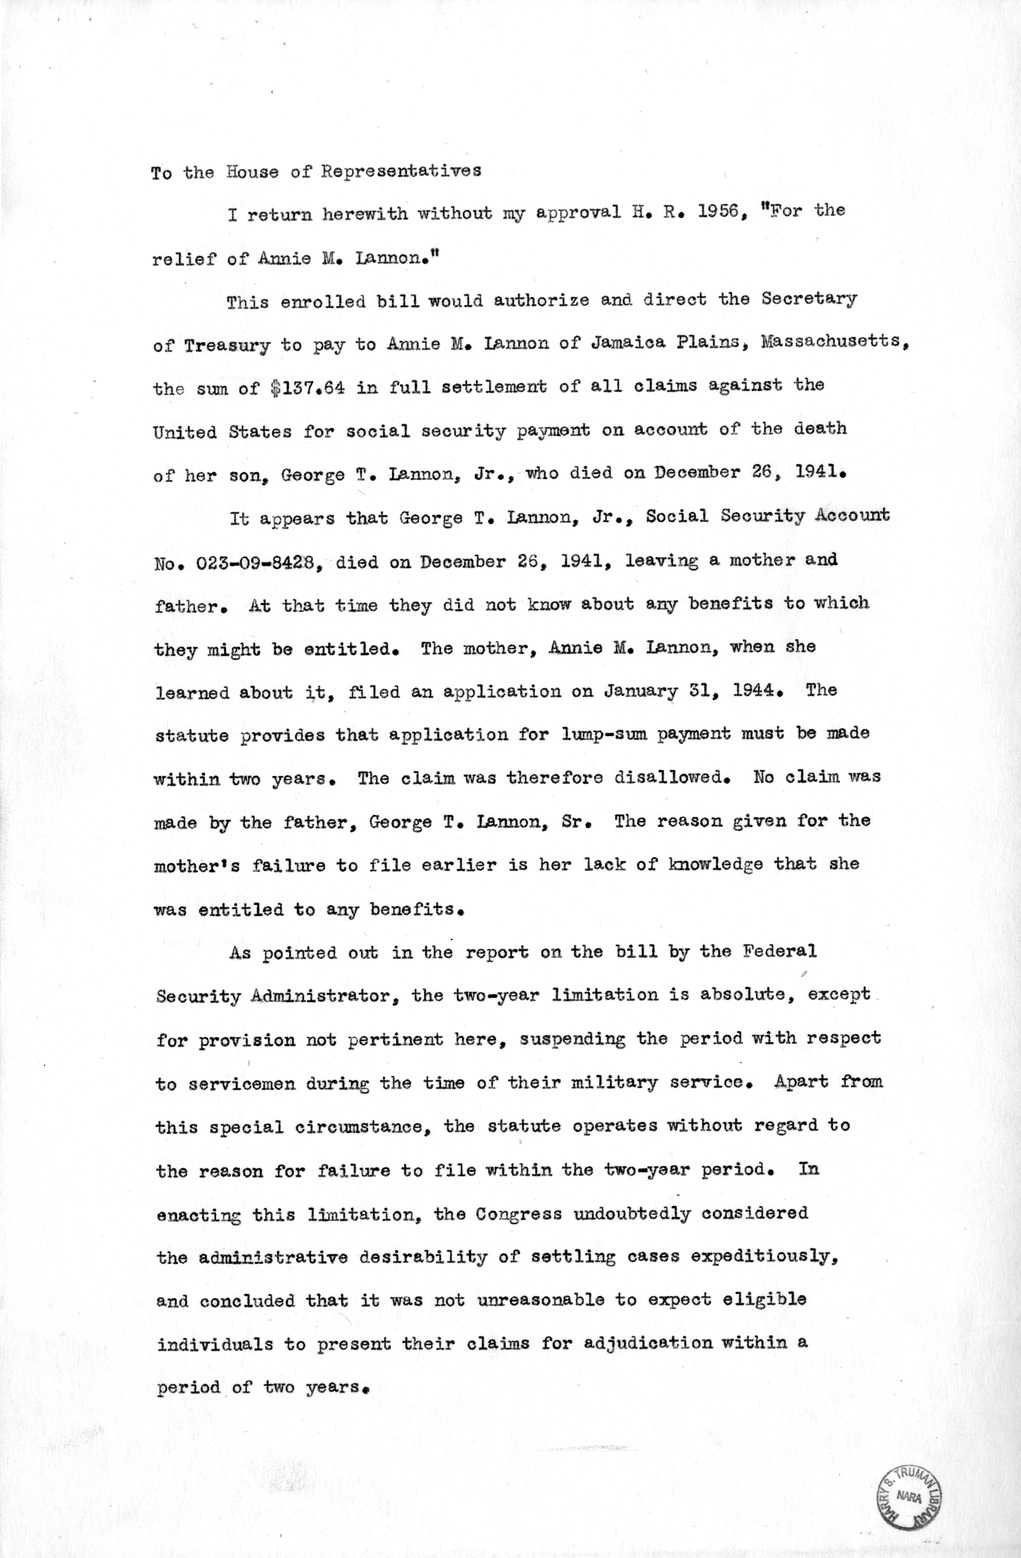 Memorandum from Harold D. Smith to M. C. Latta, H.R. 1956, For the Relief of Annie M. Lannon, with Attachments